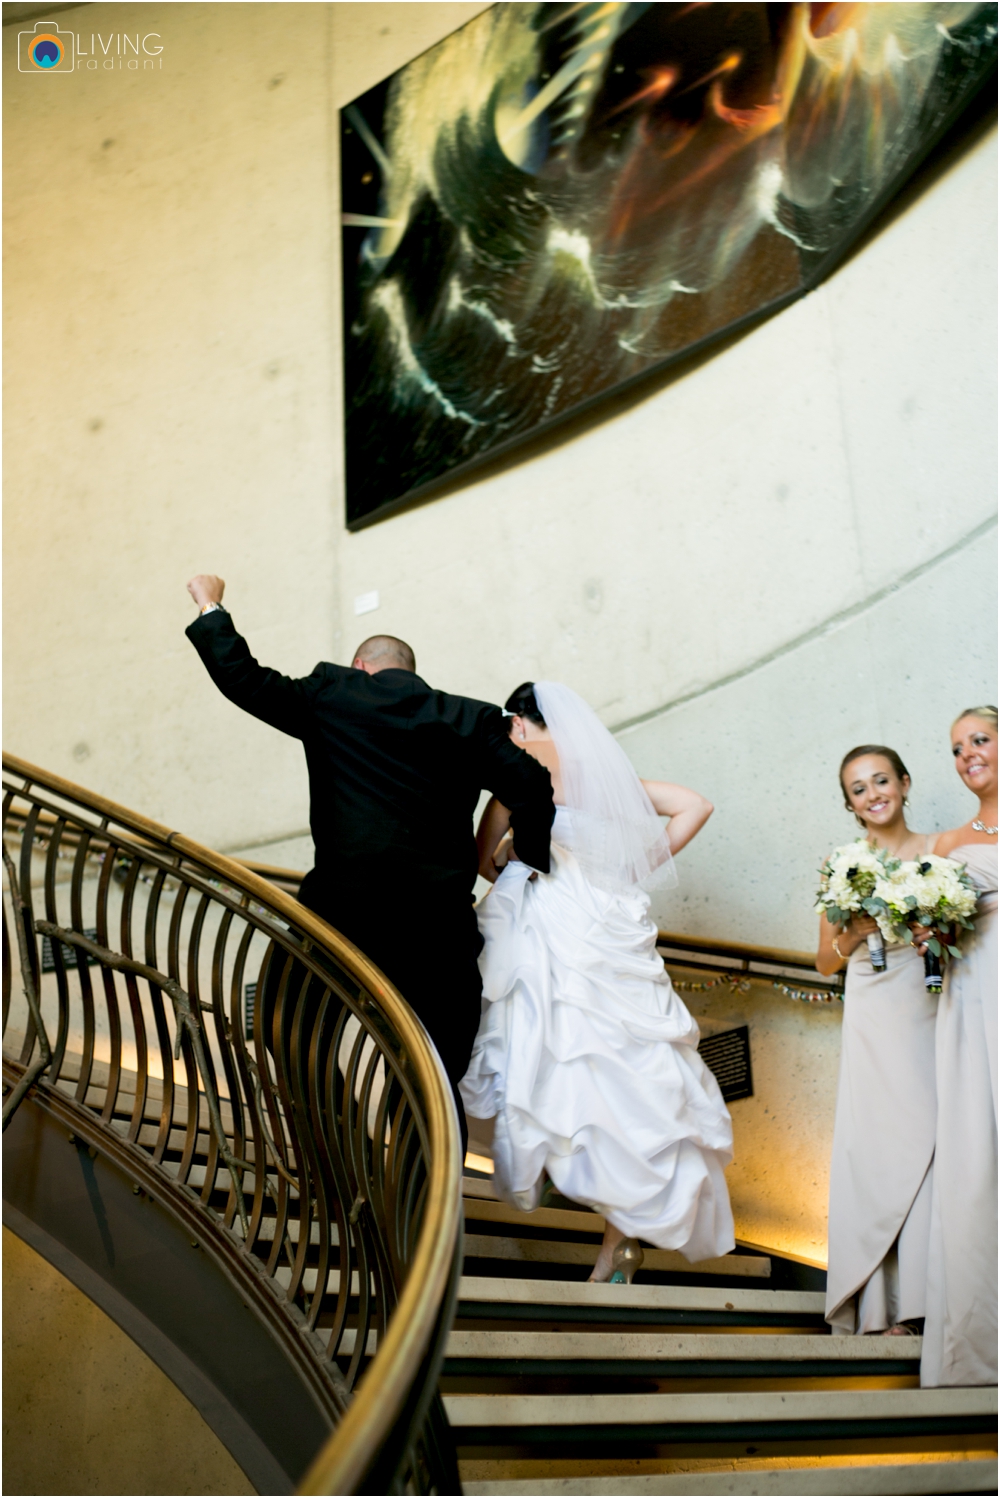 jessica-kevin-mcnally-AVAM-american-visionary-art-museum-downtown-federal-hill-baltimore-inner-harbor-wedding-living-radiant-photography-maggie-patrick-nolan_0058.jpg